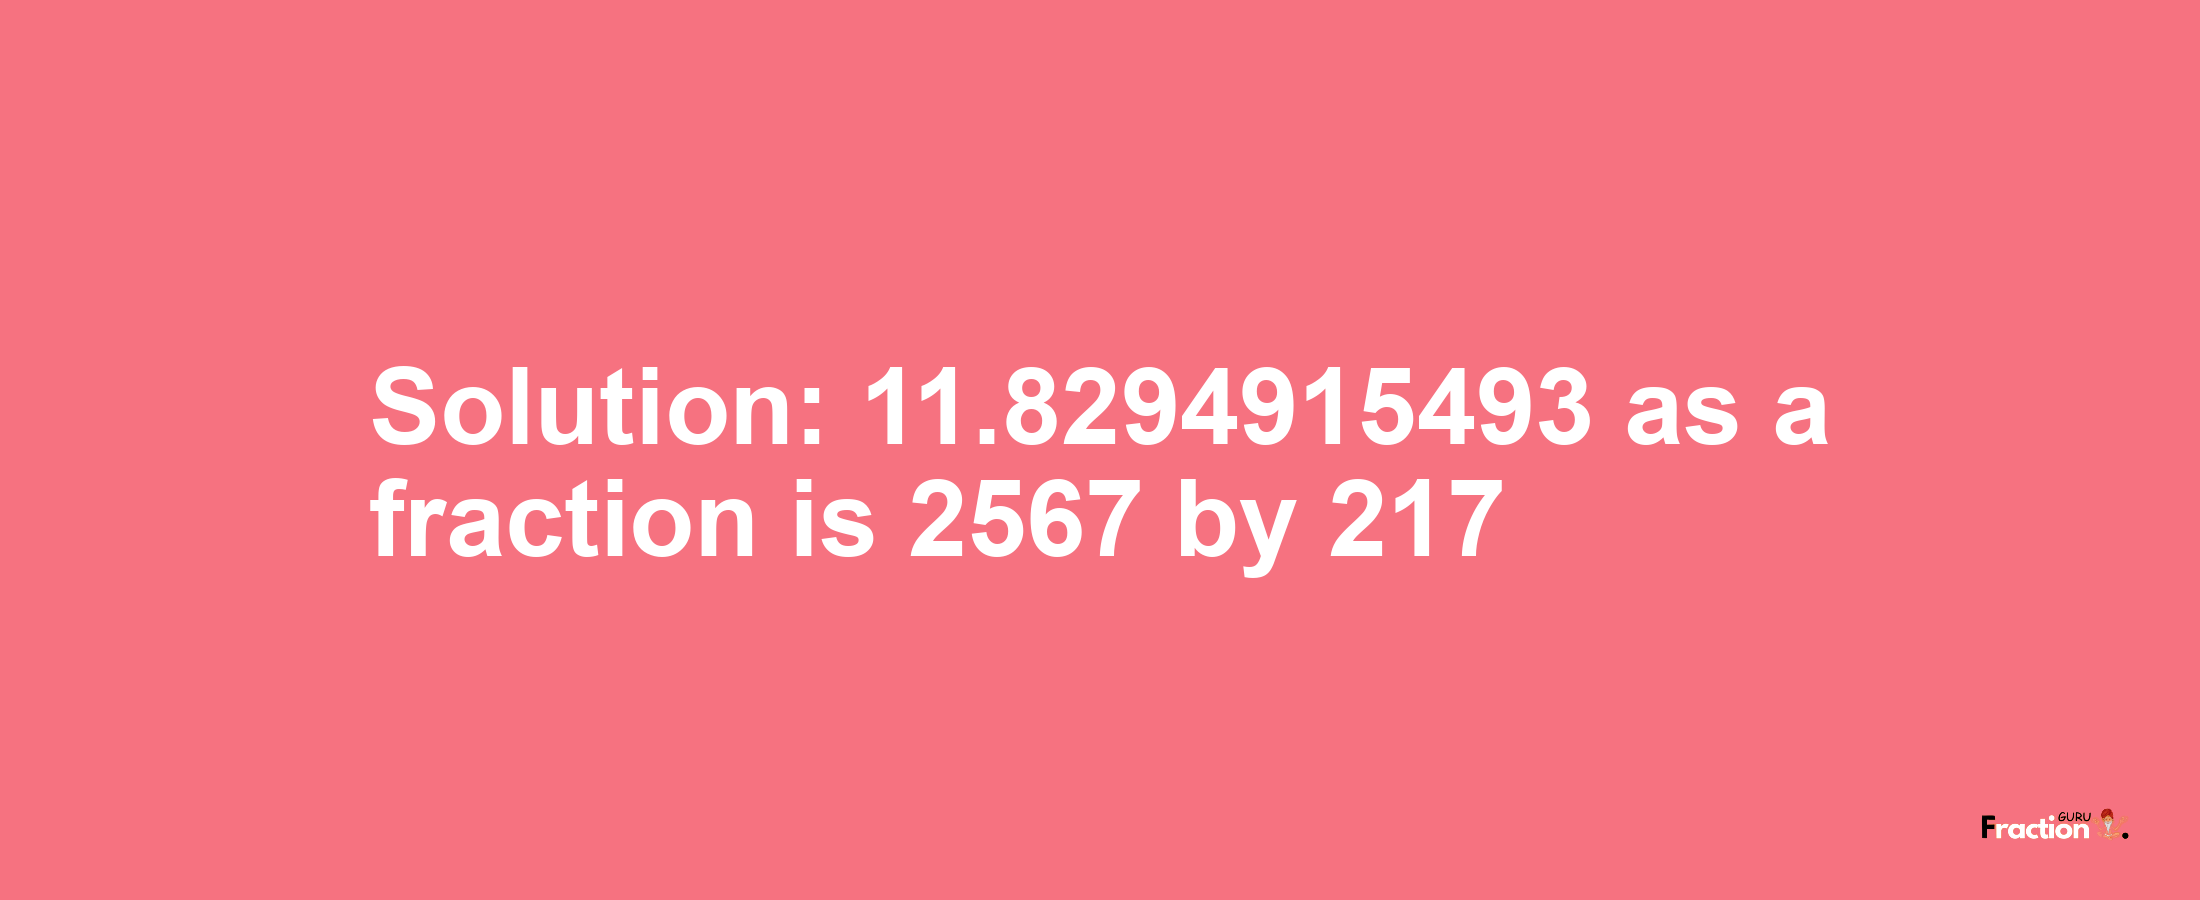 Solution:11.8294915493 as a fraction is 2567/217